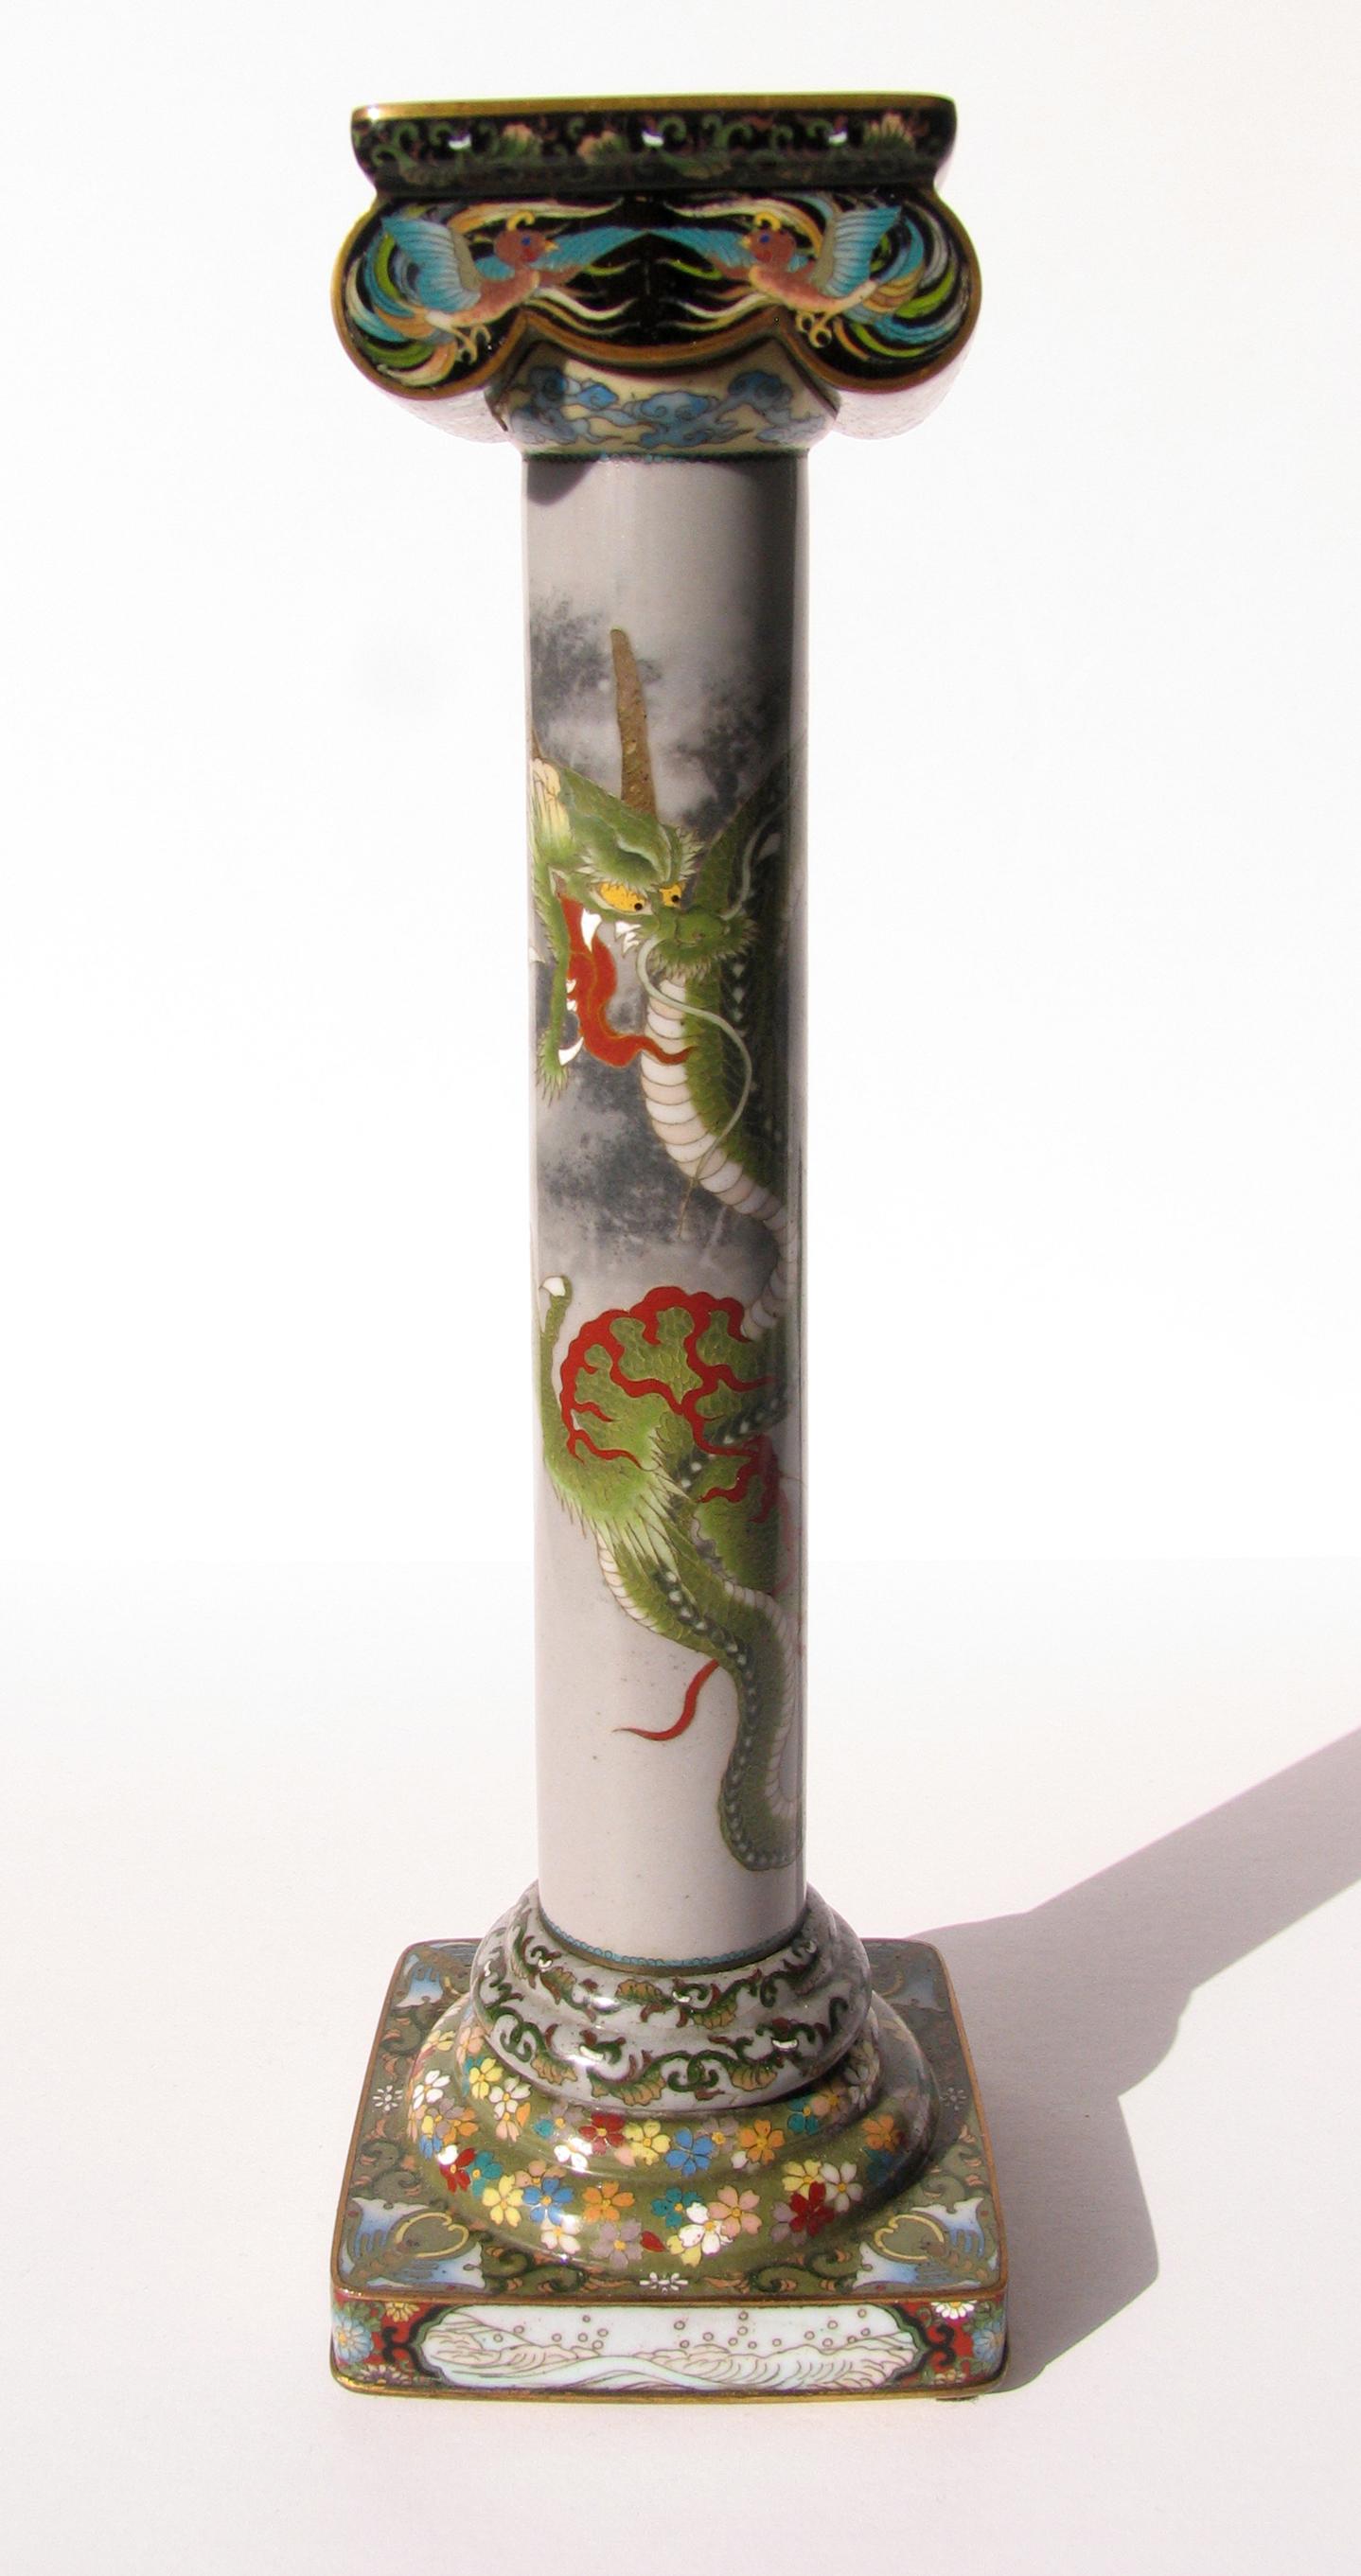 Exquisite Japanese Meiji period Cloisonne candlestick holder decorated with a dragon.
Finely detailed metal and enamel work. In excellent age appropriate condition.